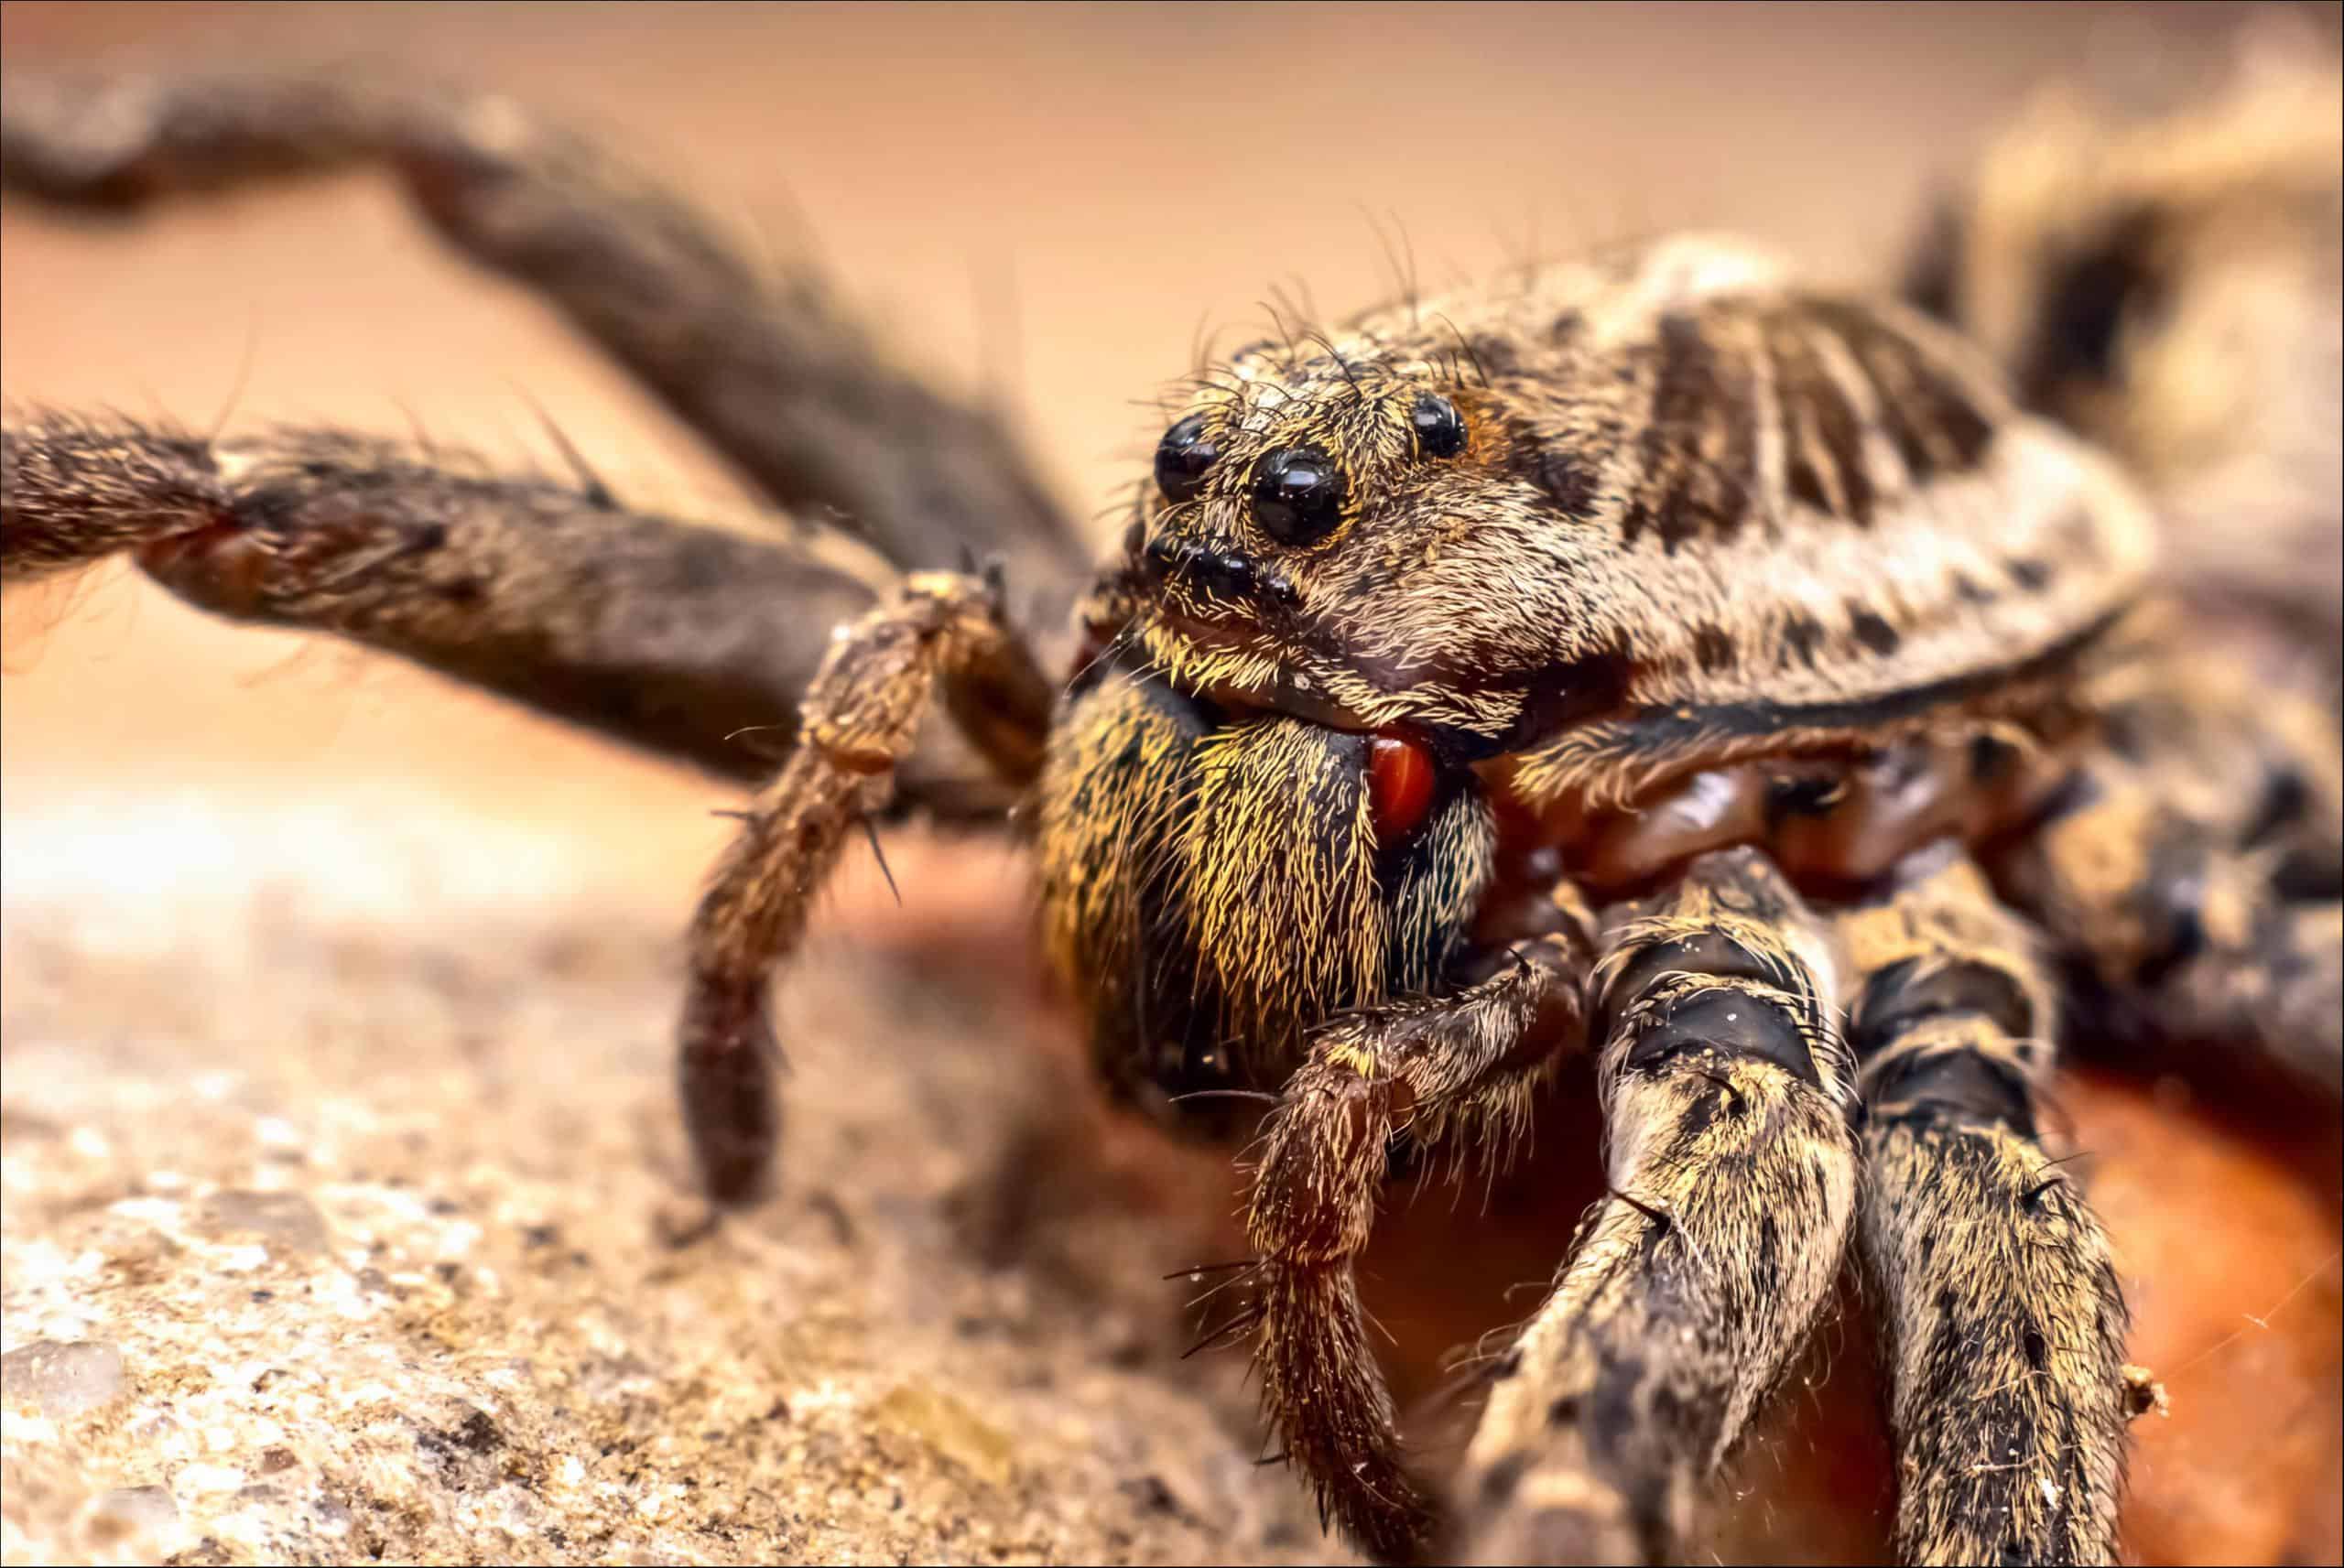 How Dangerous Is A Wolf Spider Bite? - FirstAidPro